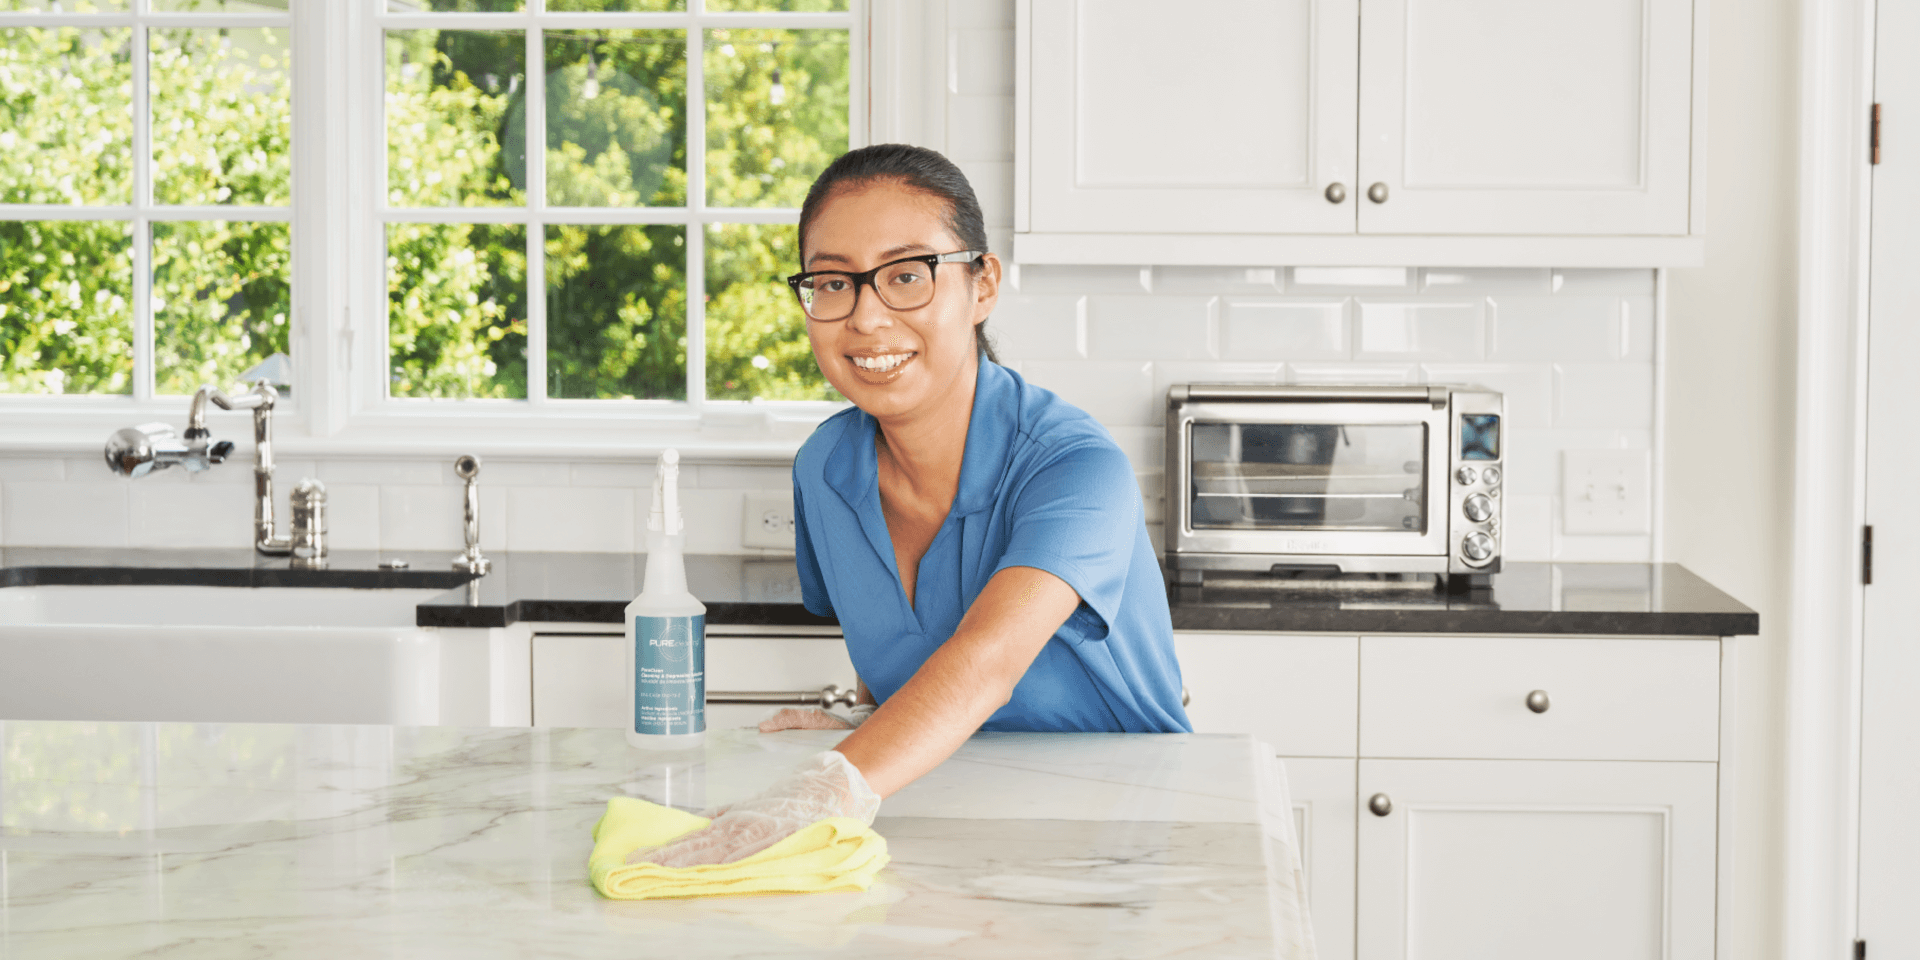 Professional house cleaner wiping countertop